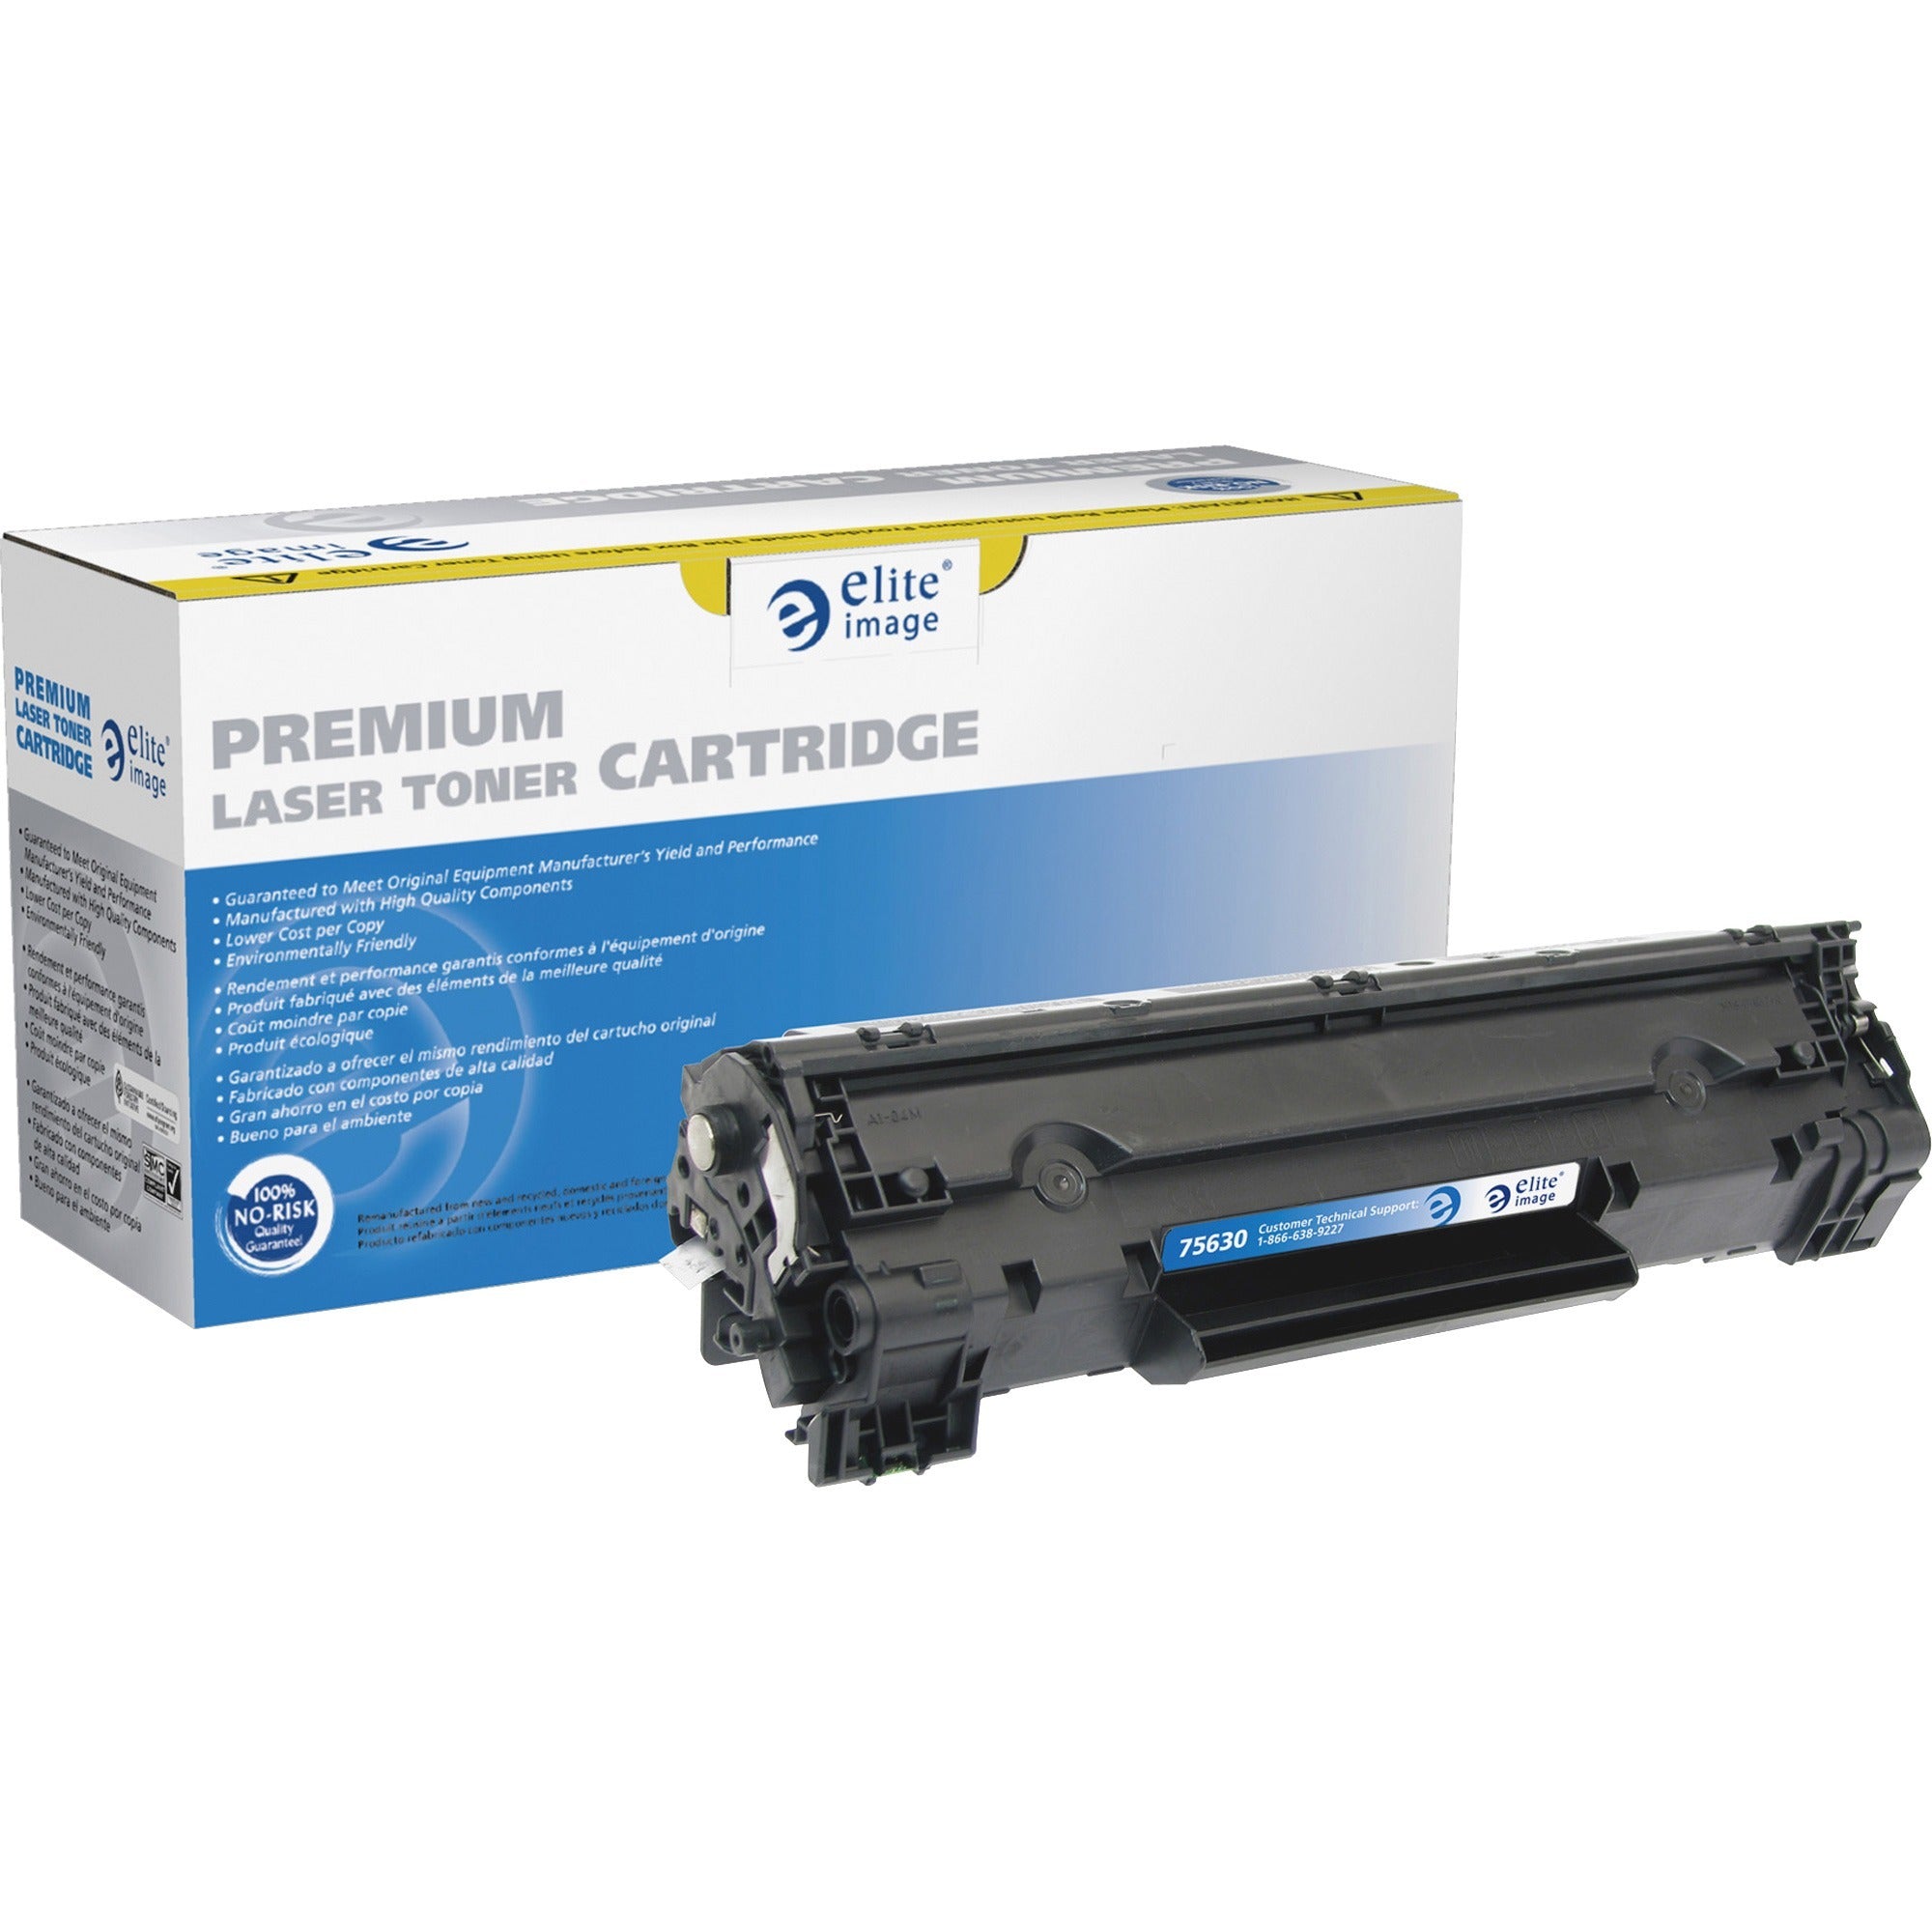 Elite Image Remanufactured Ultra High Yield Laser Toner Cartridge - Alternative for HP 85A (CE285A) - Black - 1 Each - 2300 Pages - 1